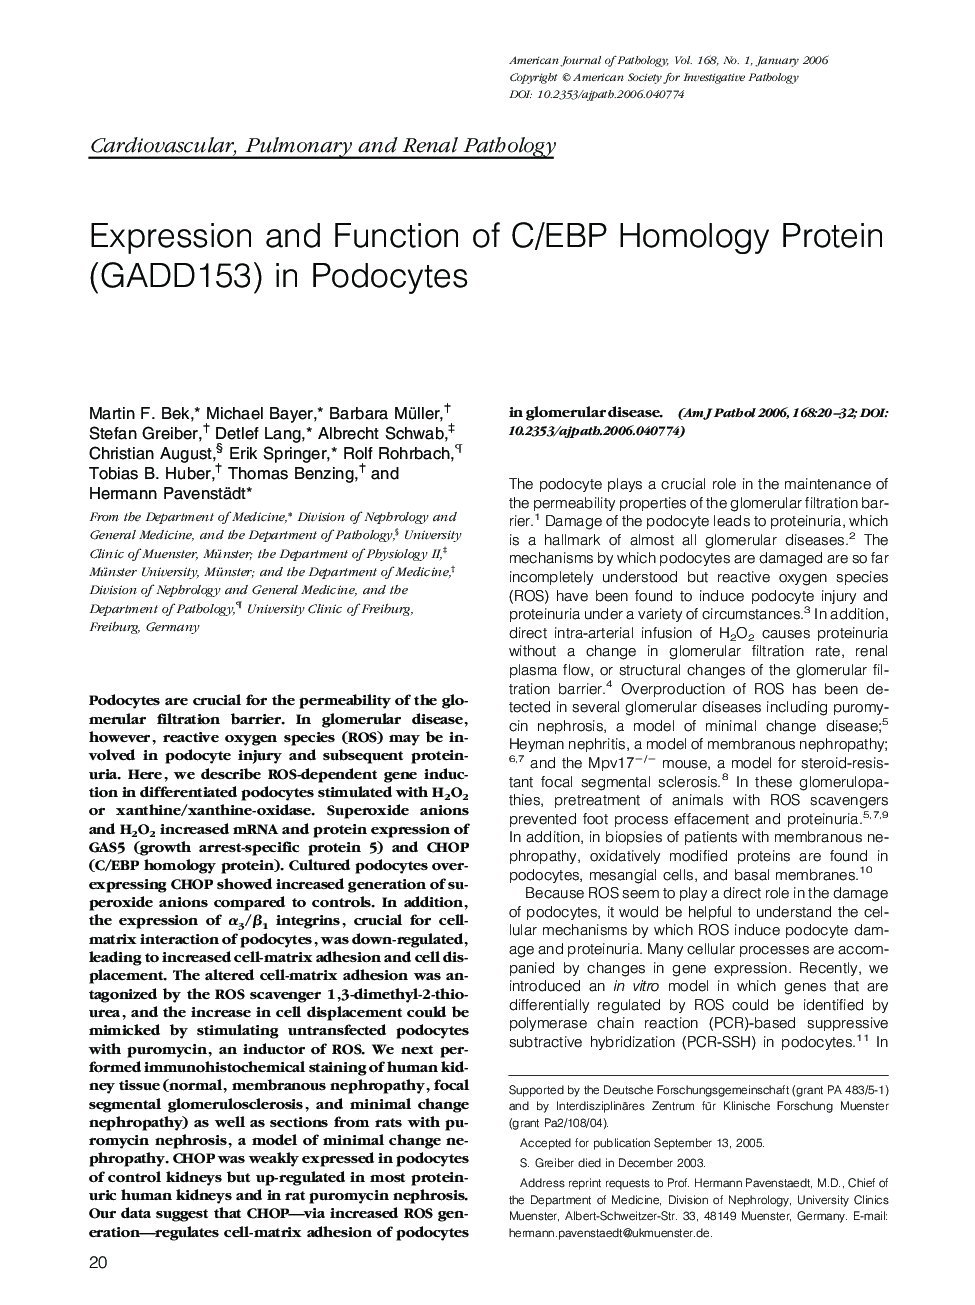 Expression and Function of C/EBP Homology Protein (GADD153) in Podocytes